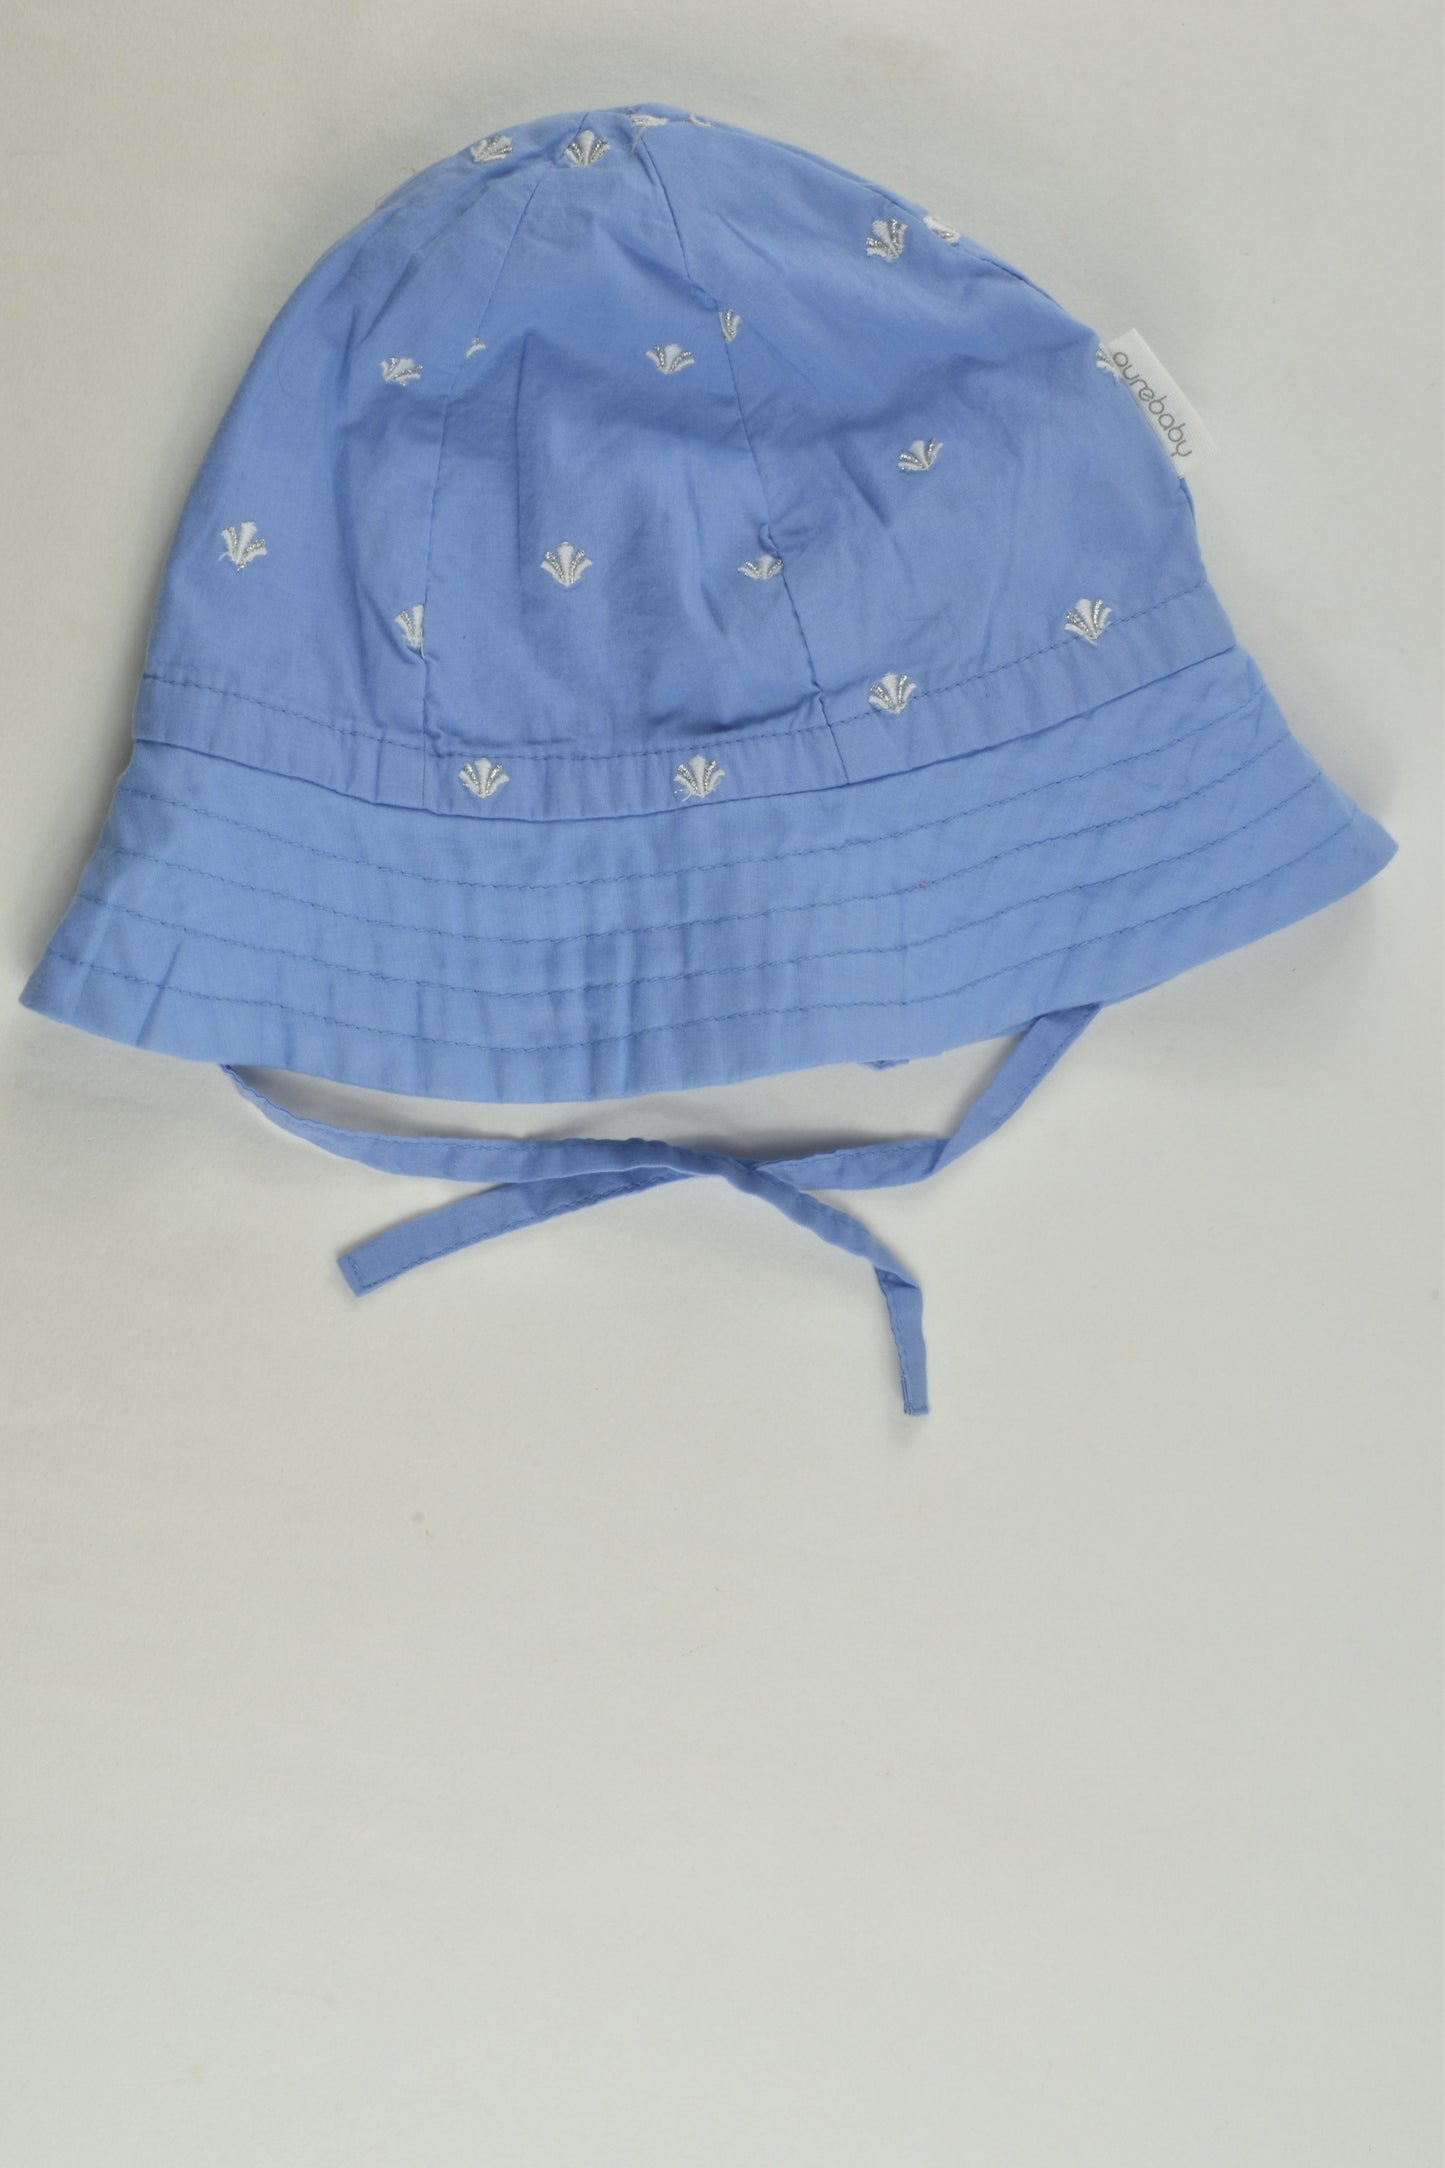 Purebaby Size L (3-5 years) Hat